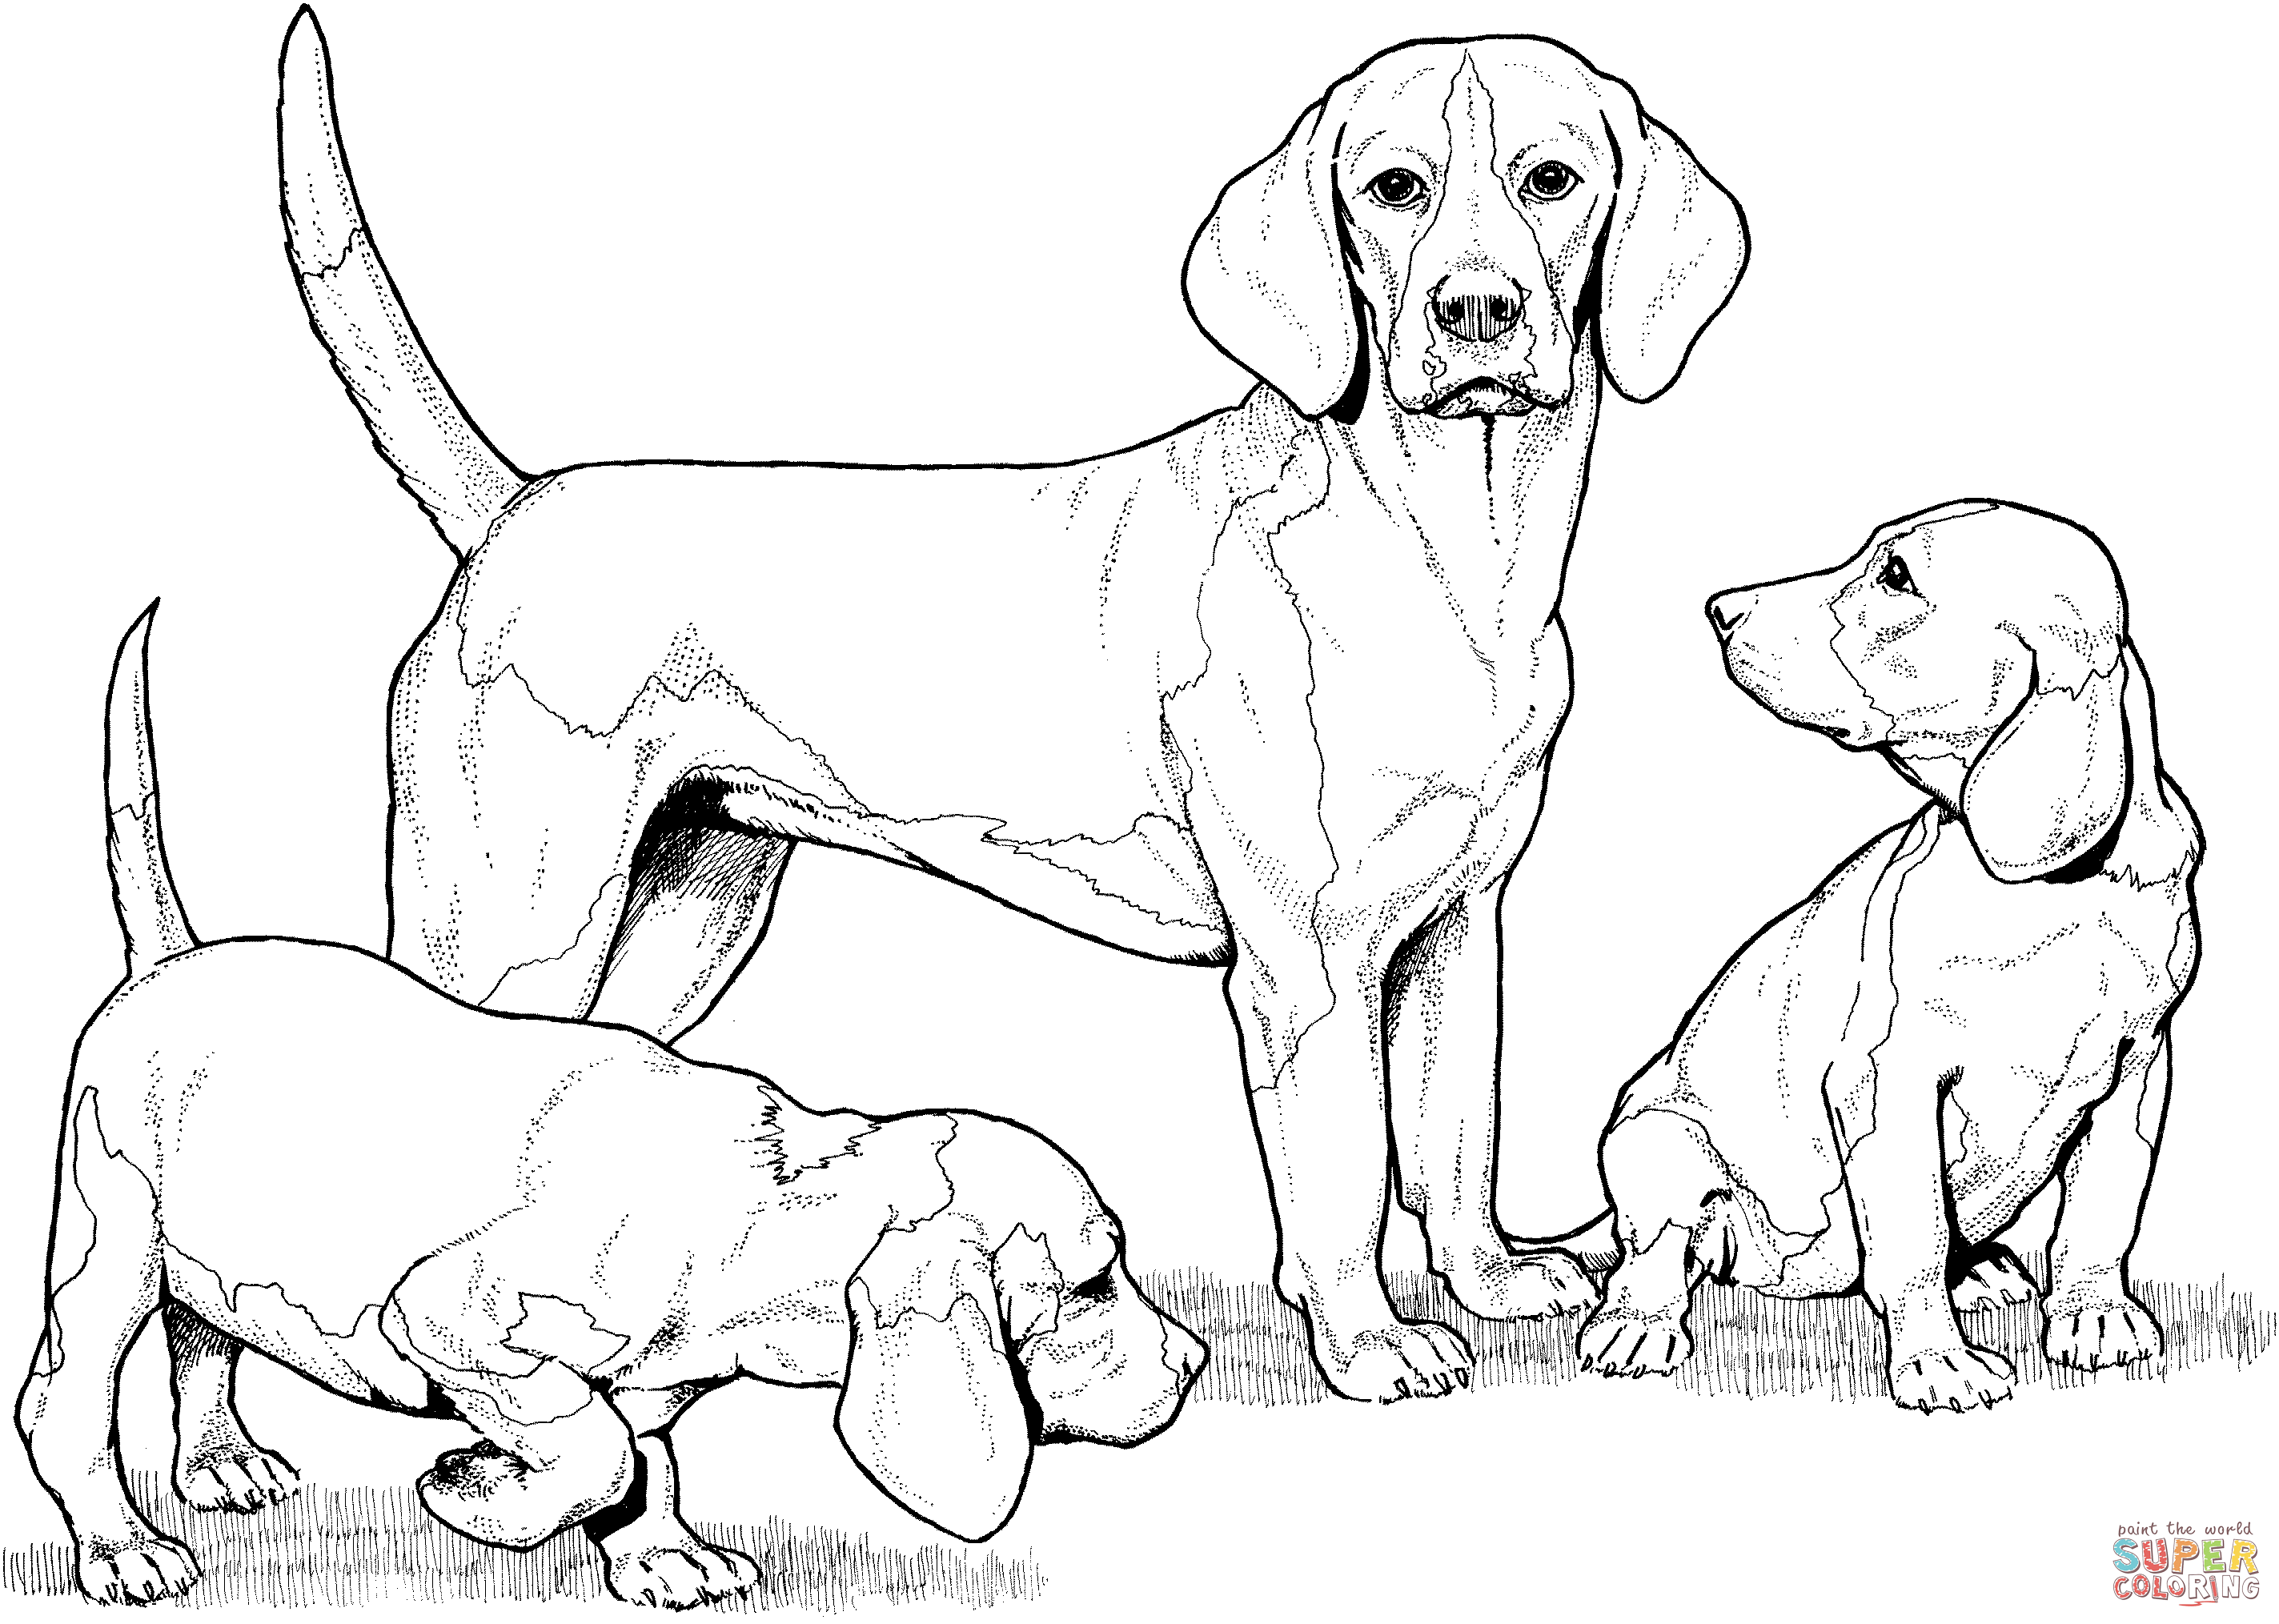 Beagle with Puppies coloring page | Free Printable Coloring Pages